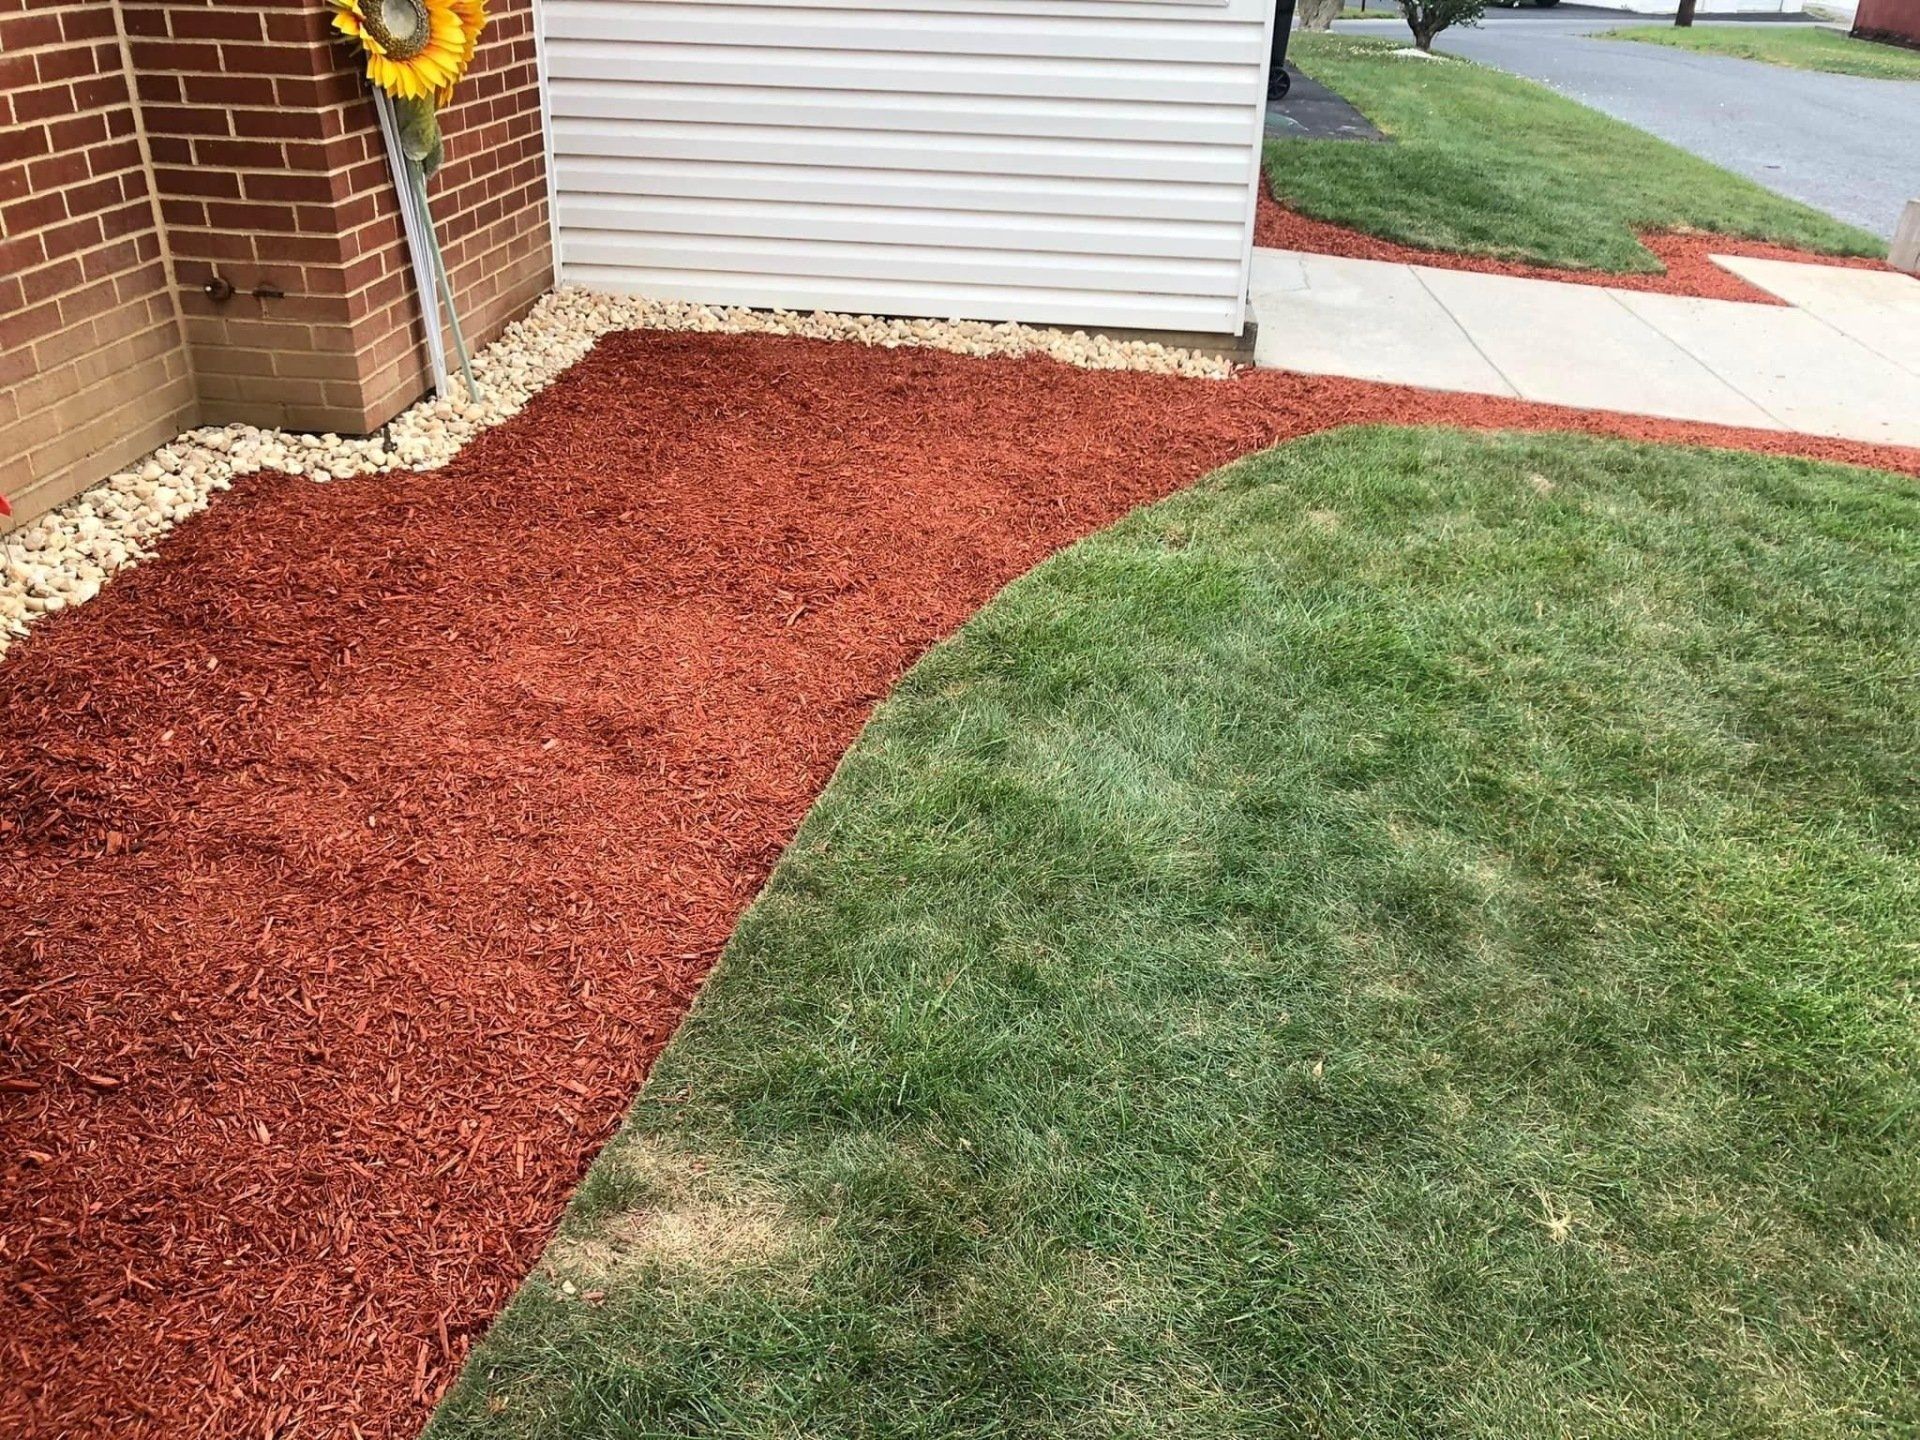 Red mulch, pebbles, and green grass